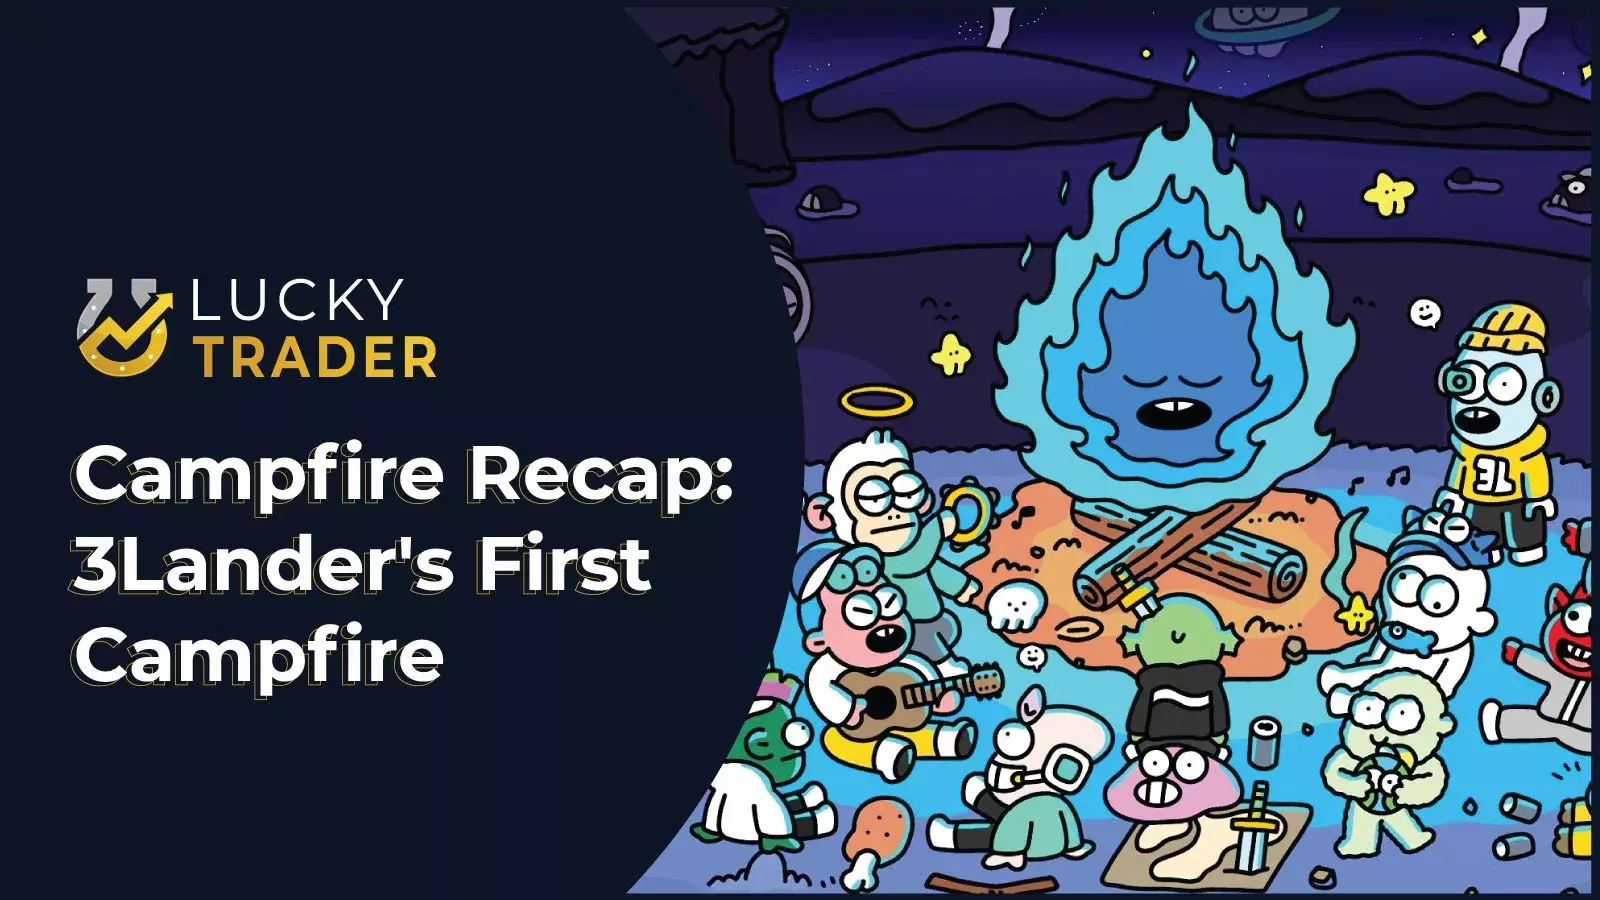 Campfire Recap: 3Lander's First Campfire and Project Vision